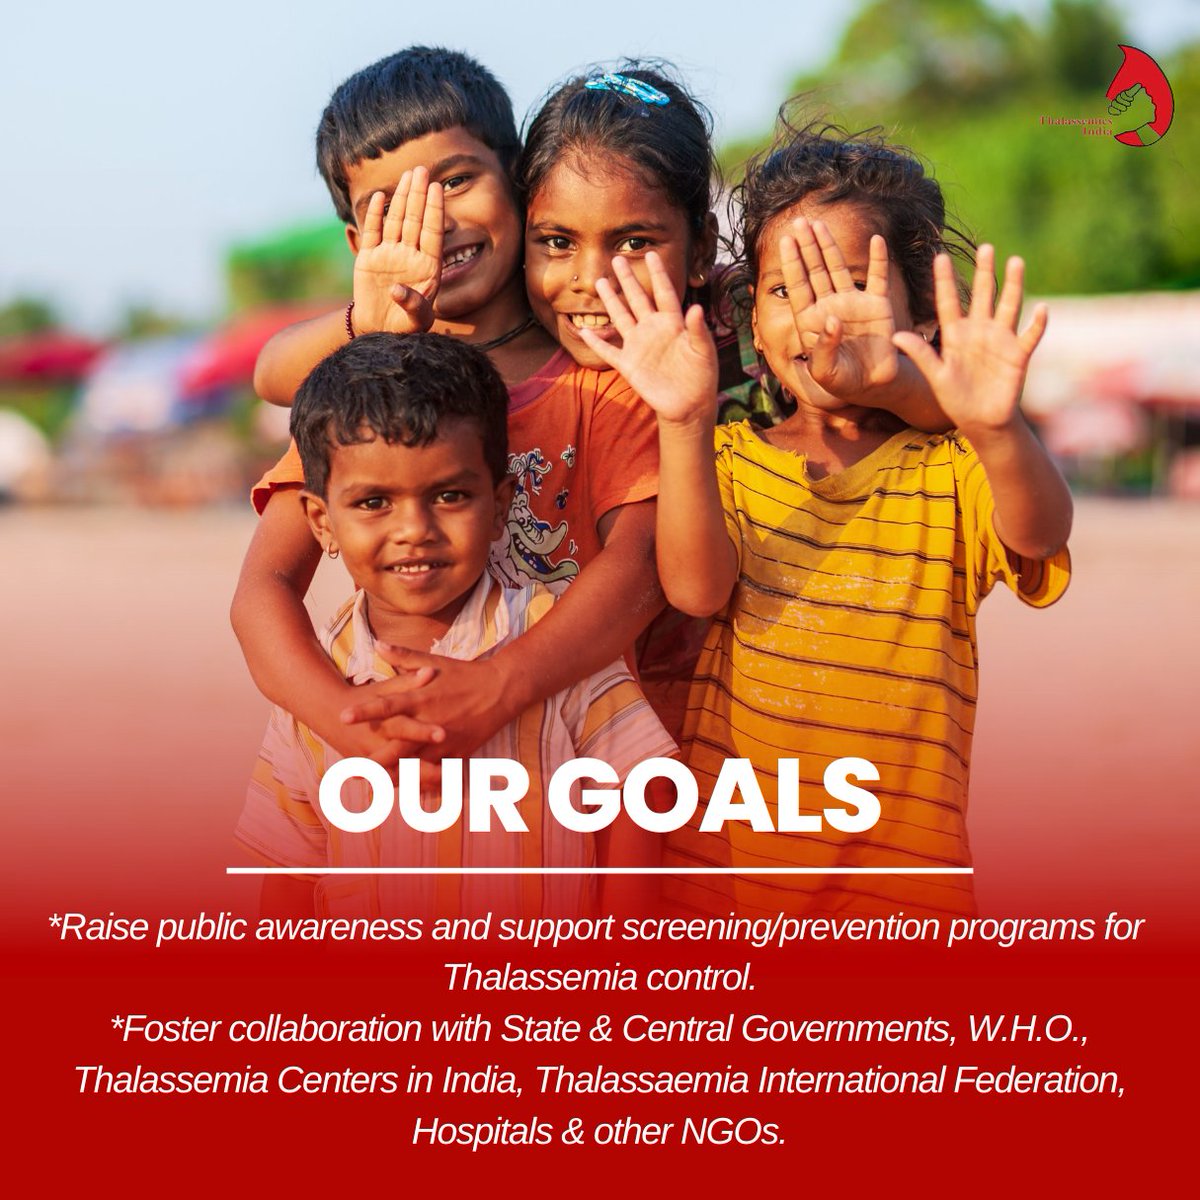 Empowering Lives, Transforming Futures: Our goal is to advocate for enhanced treatment facilities and resources for underprivileged Thalassemia patients. Join us in the fight against Thalassemia. #OurGoals #WhoWeAre #ourmission #thalassemia #thalassemiatreatment